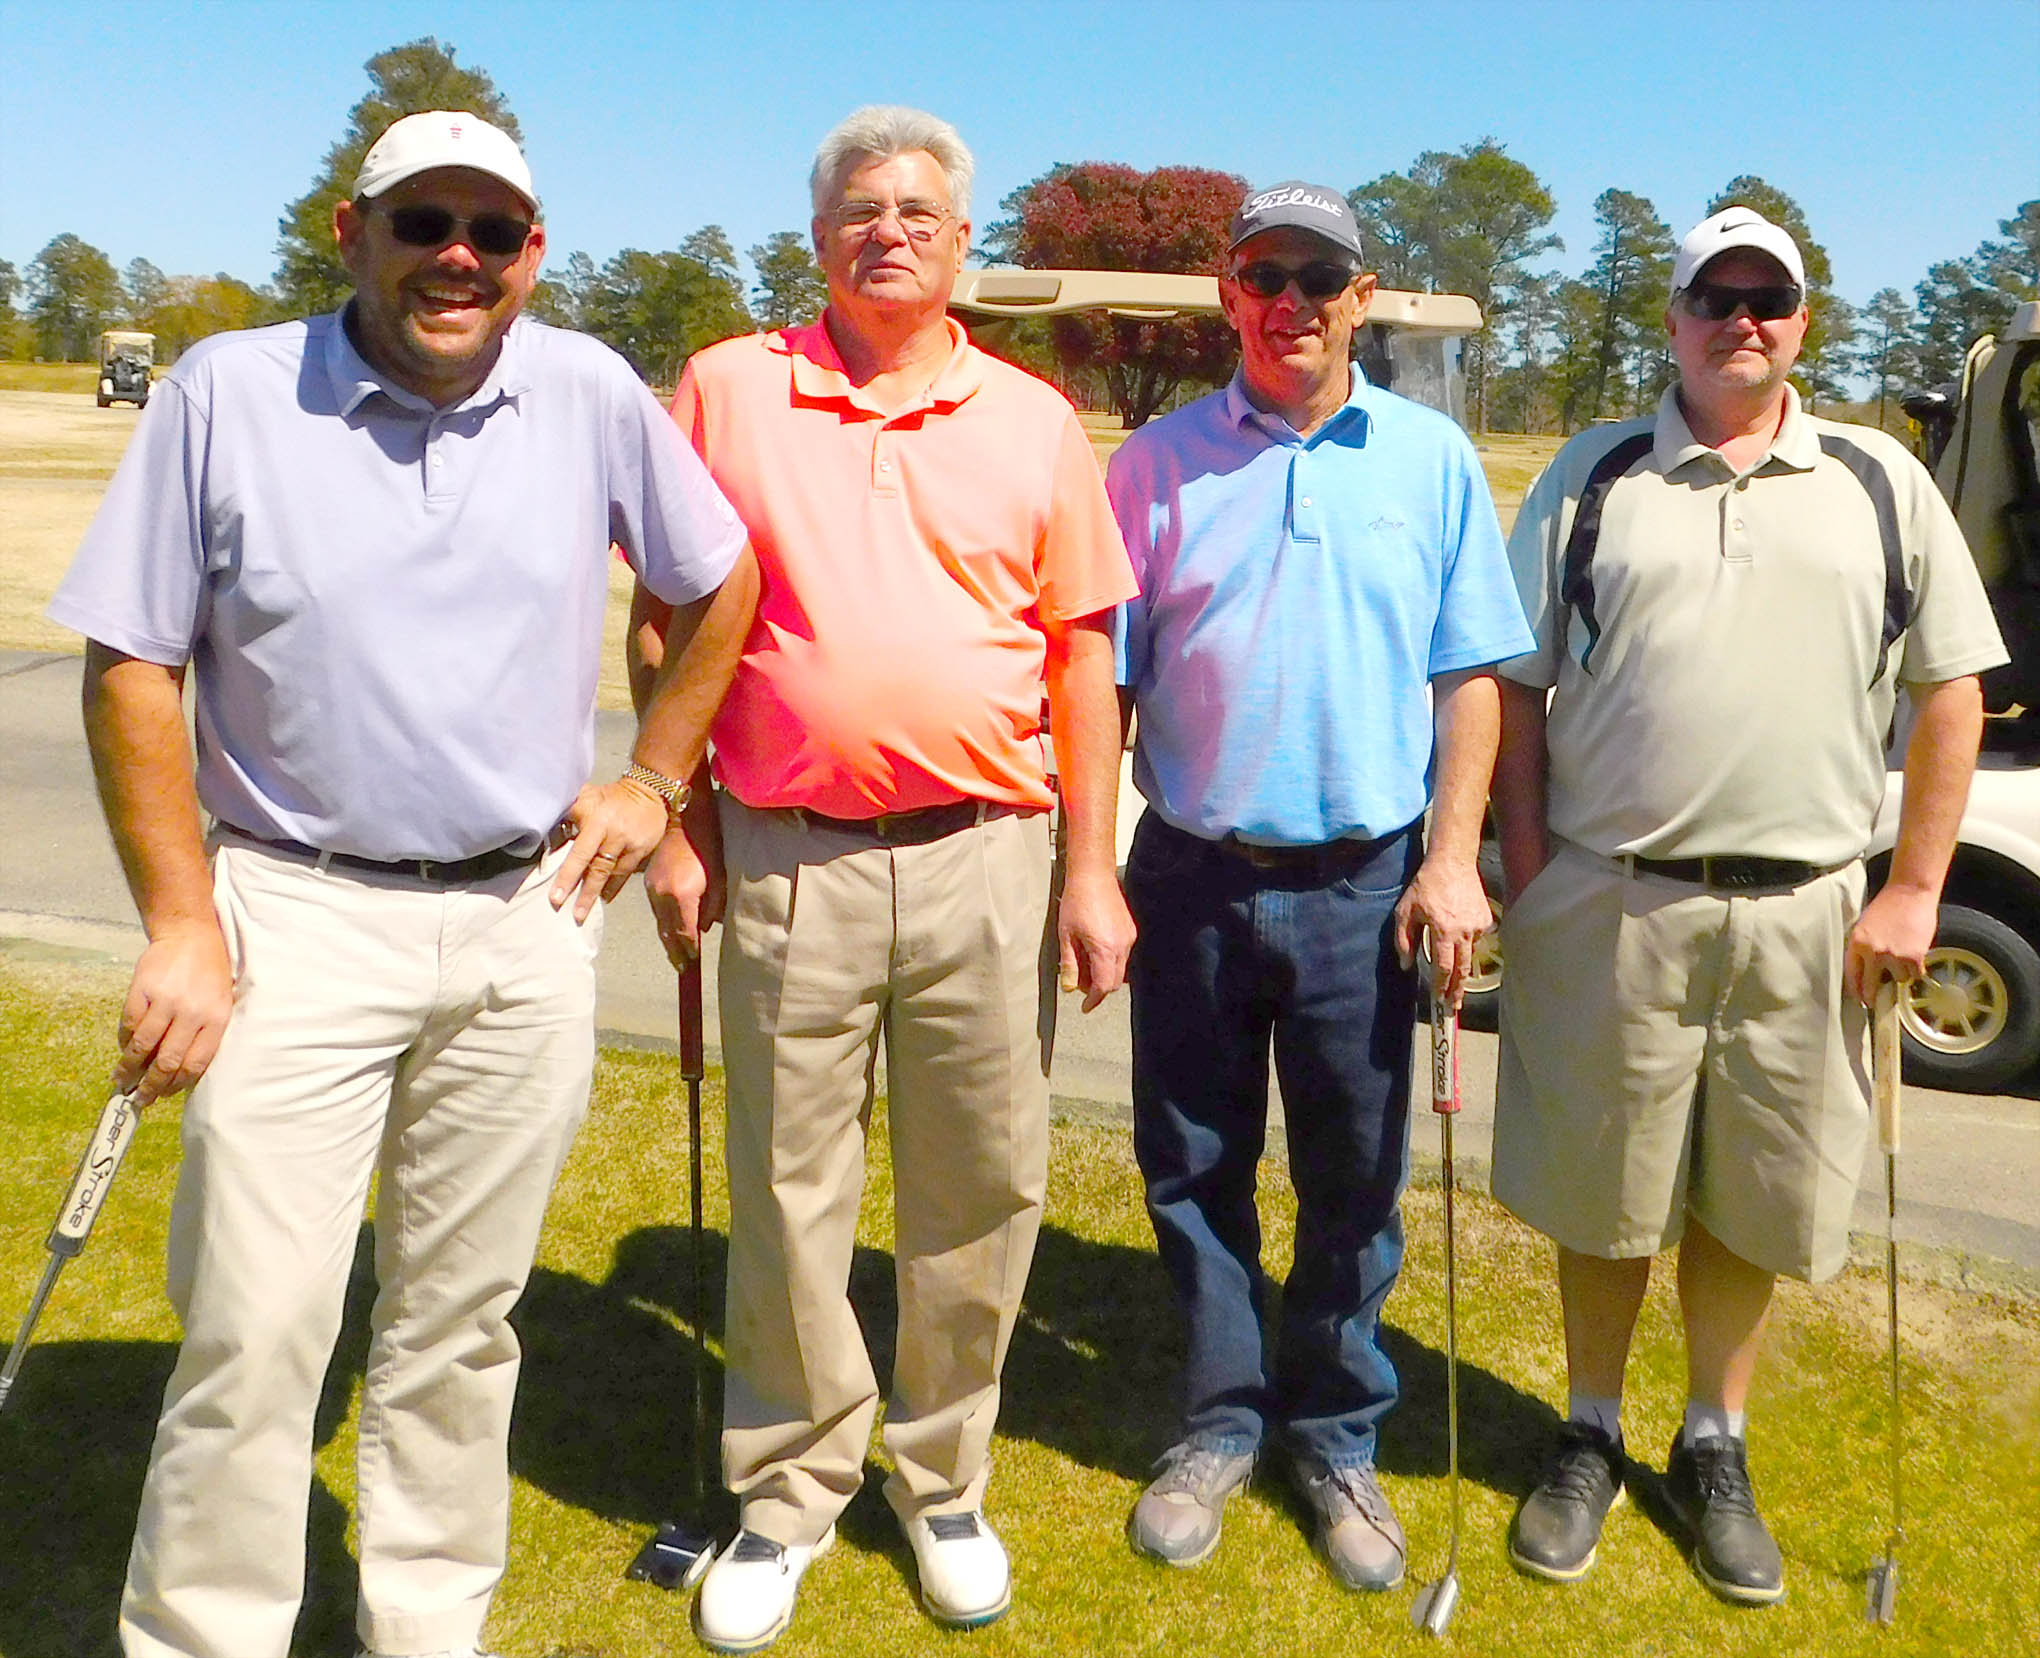 Click to enlarge,  Members of the first flight winning team in the sixth Central Carolina Community College Foundation Harnett Golf Classic were Elmon Williams, Wayne Wood, Brad Weaver, and Mike Thompson. For information about the Foundation, donating to it, establishing a scholarship, or other fund-raising events, contact Dr. Emily Hare, Executive Director of the CCCC Foundation, 919-718-7230, or ehare@cccc.edu. Information is also available at the CCCC Foundation website, www.cccc.edu/foundation. 